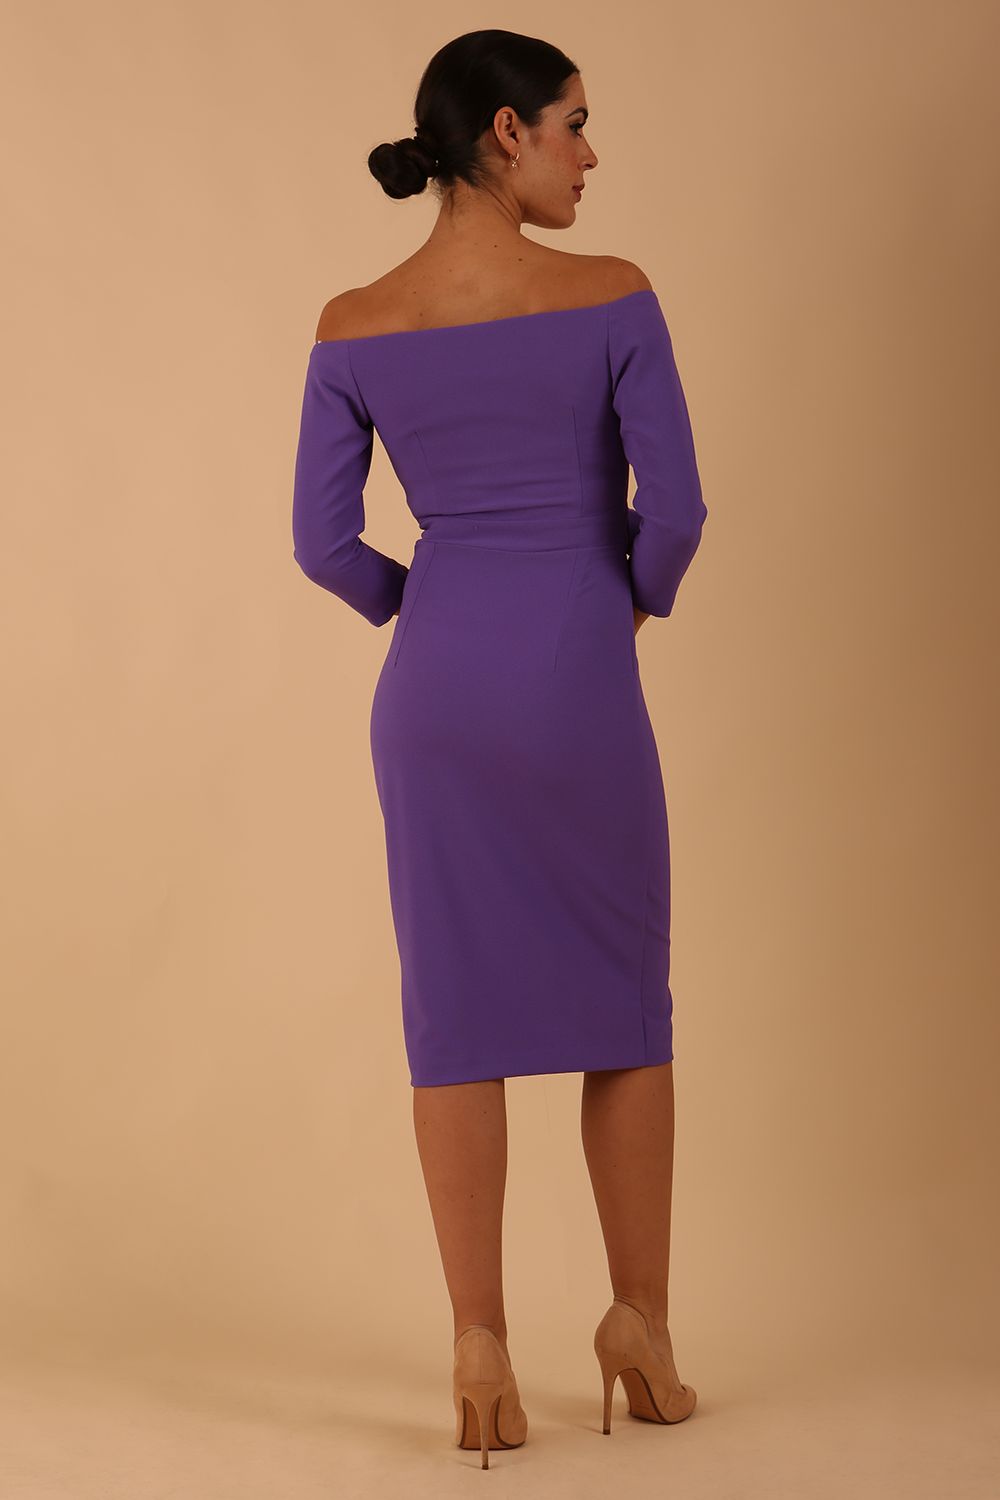 model is wearing diva catwalk charisma dress odd shoulder design with pleated detail down the front and flower detail on a side in opulent violet colour